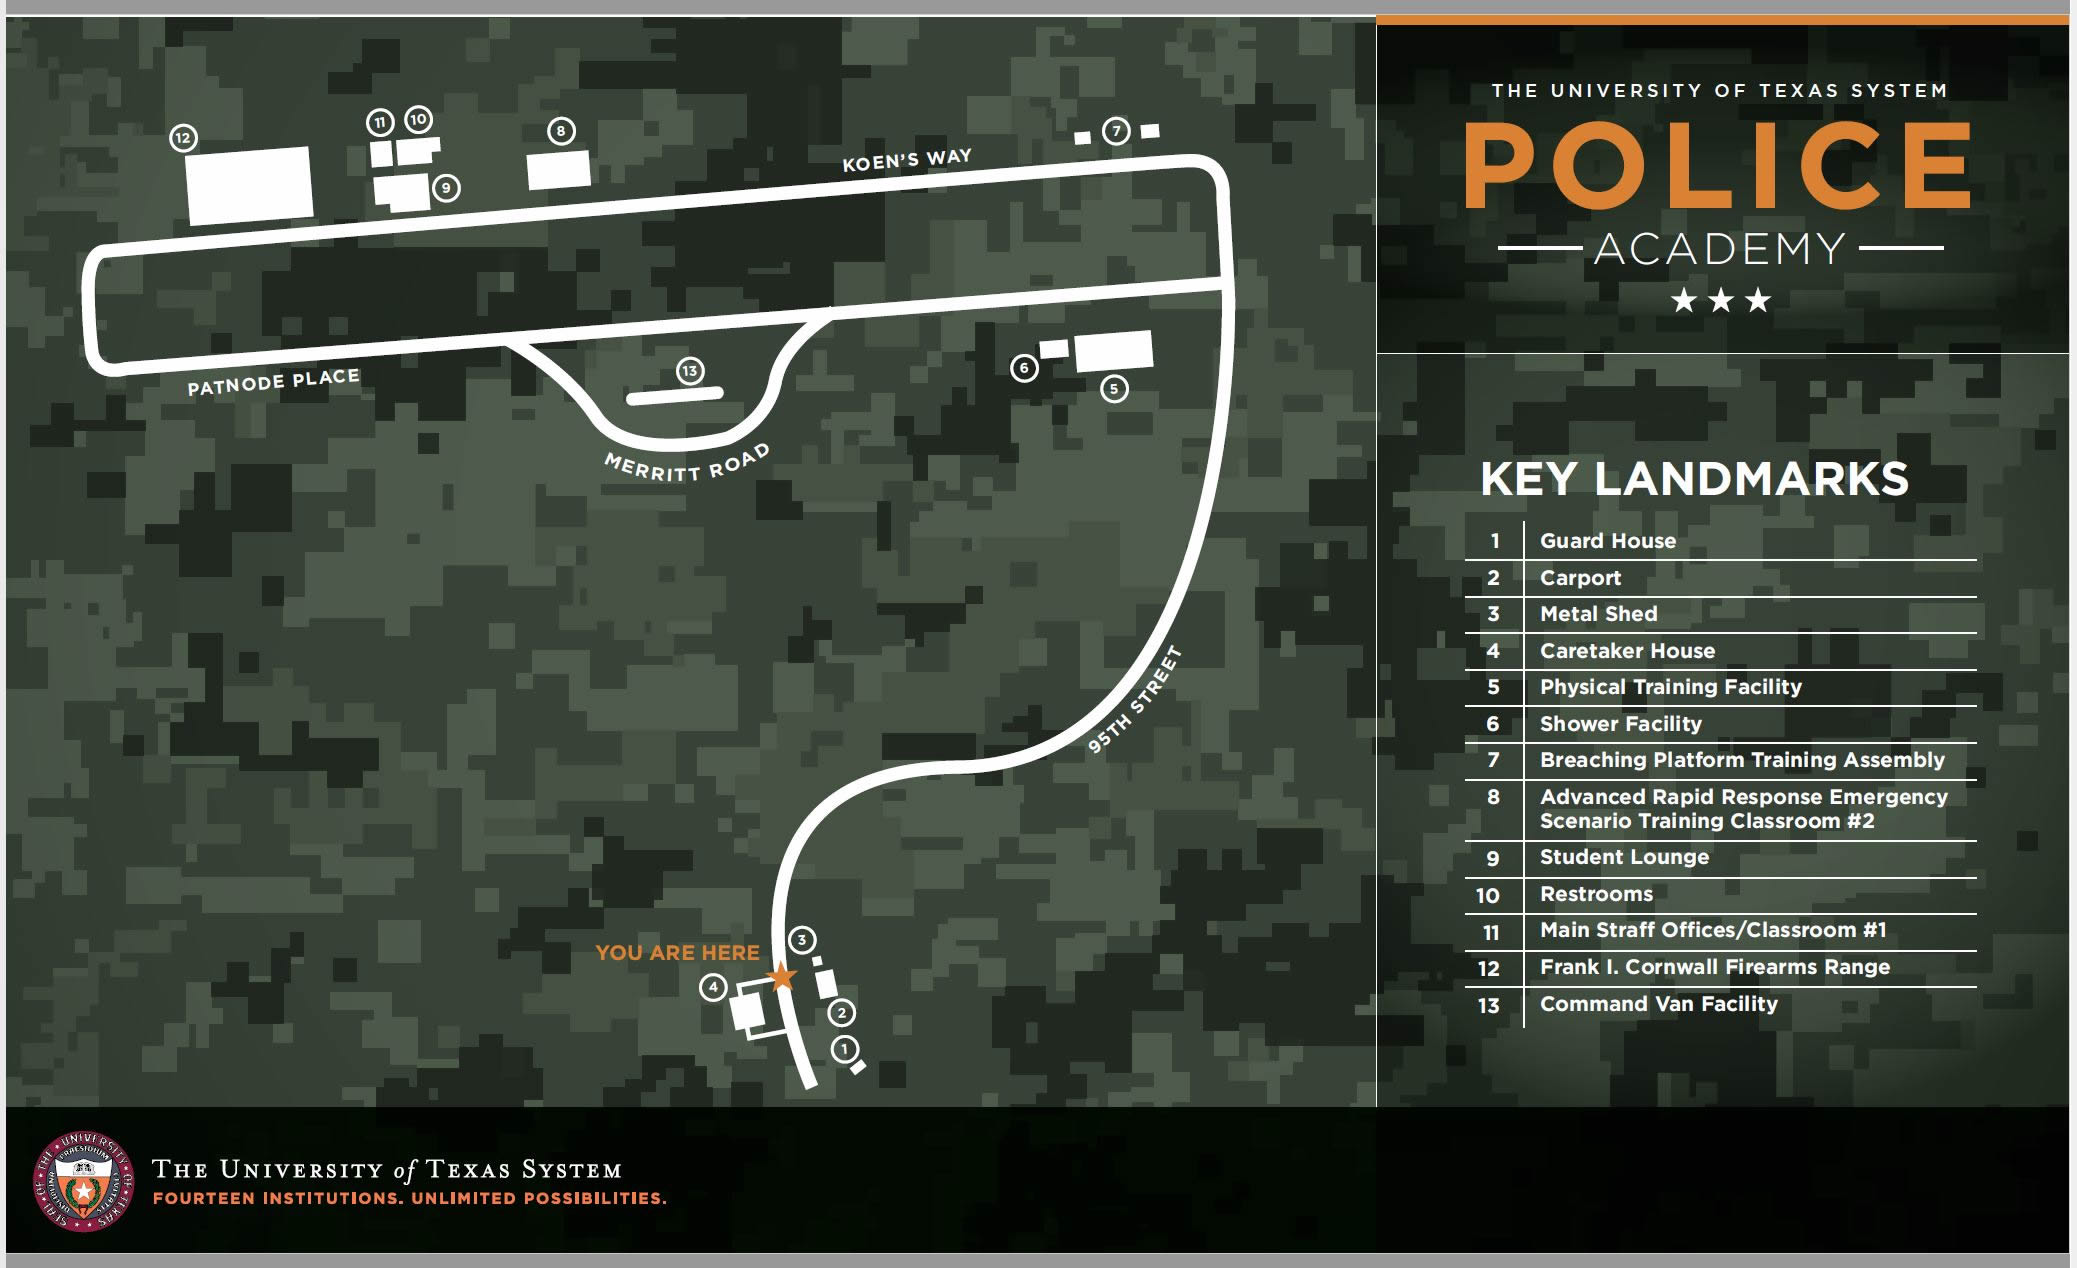 Map of the Police Academy compound